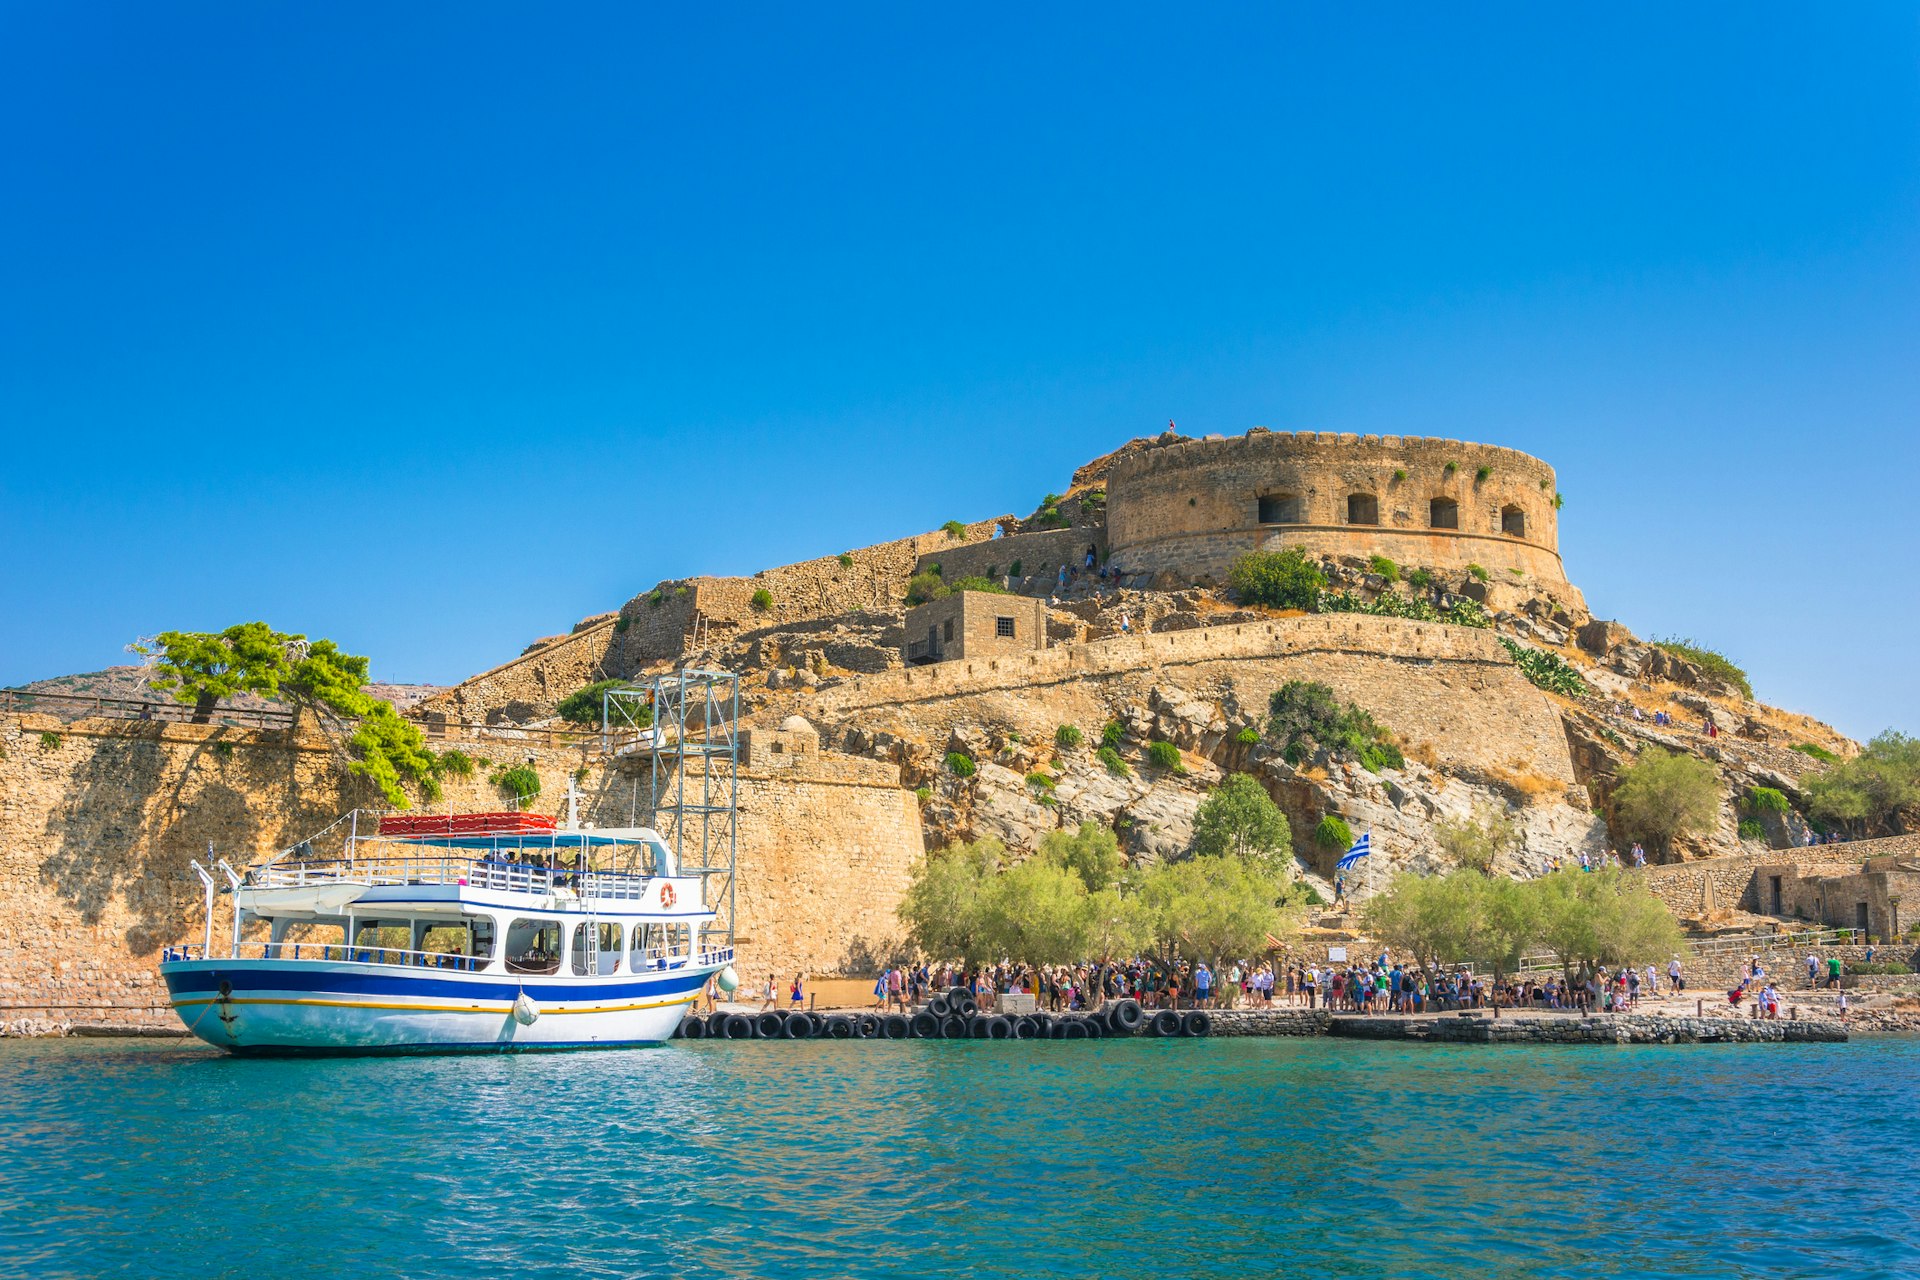 View of the island of Spinalonga with a calm sea and passengers disembarking from a ferry